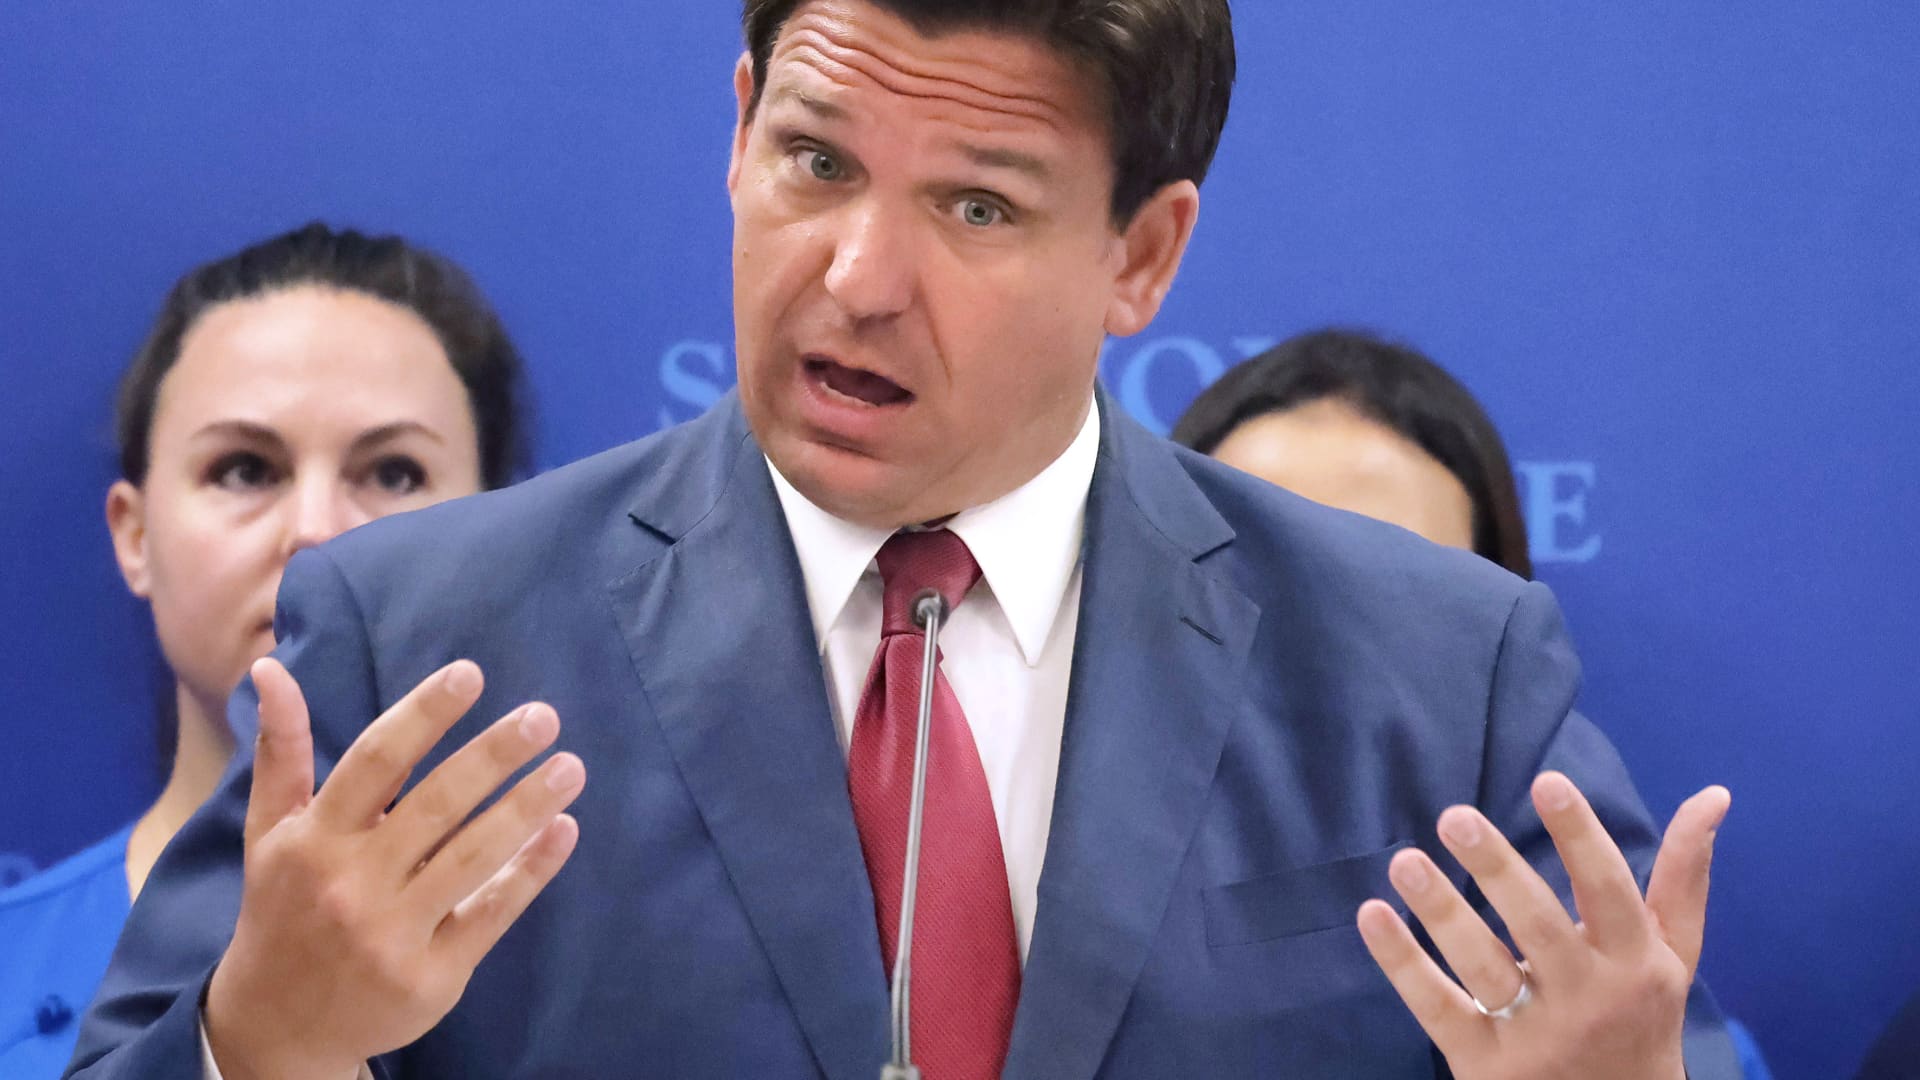 Florida Gov. Ron DeSantis answers questions during a press conference at Seminole State College in Sanford, Florida, Monday, May 16, 2022.